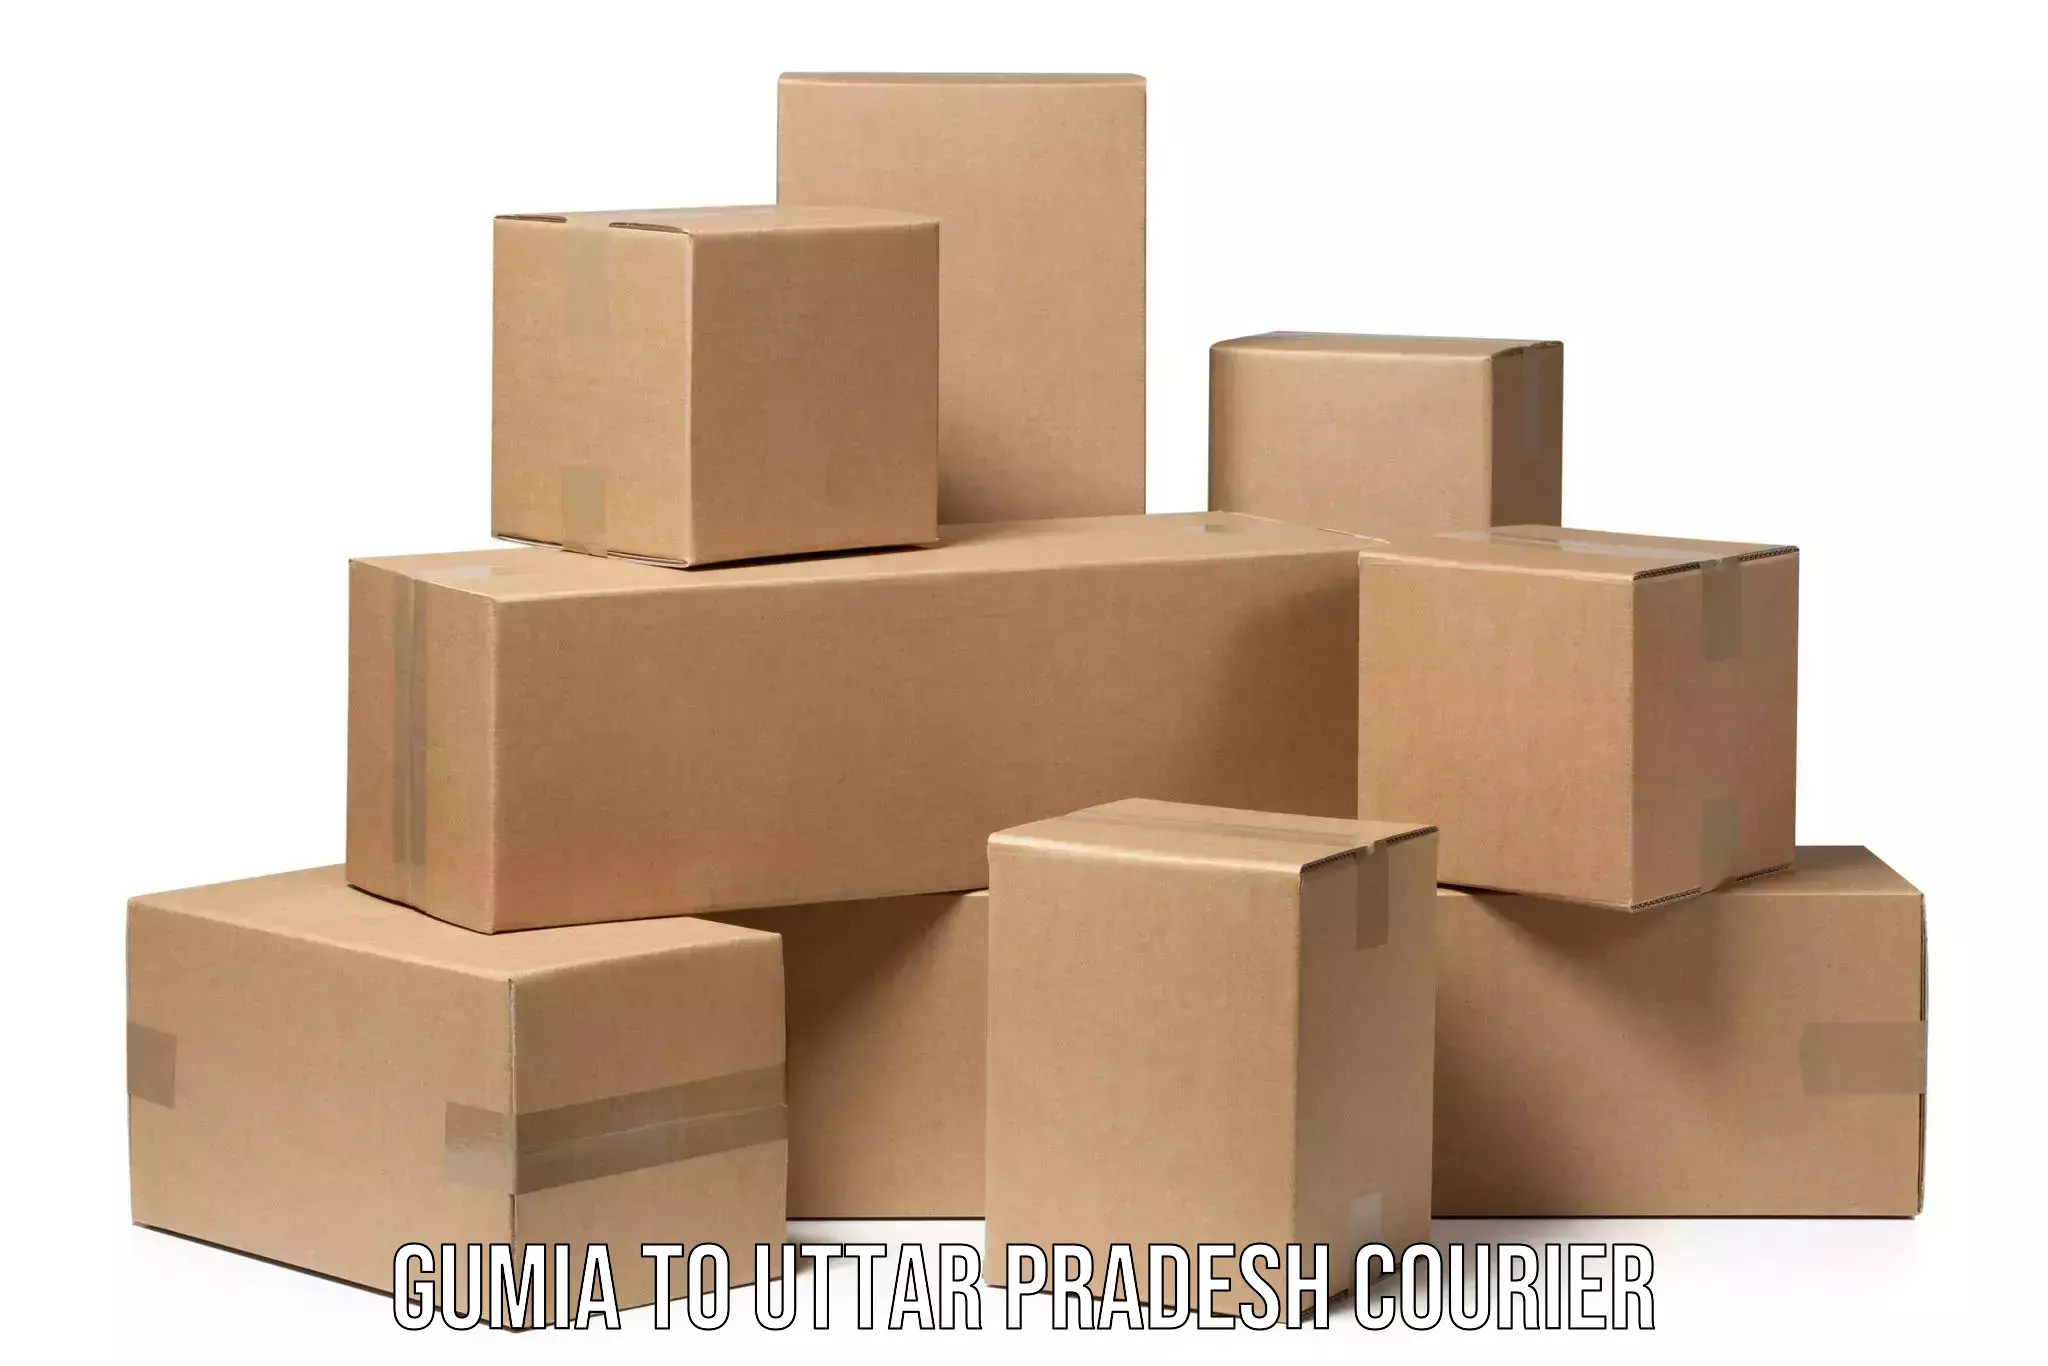 Luggage delivery network Gumia to Uttar Pradesh